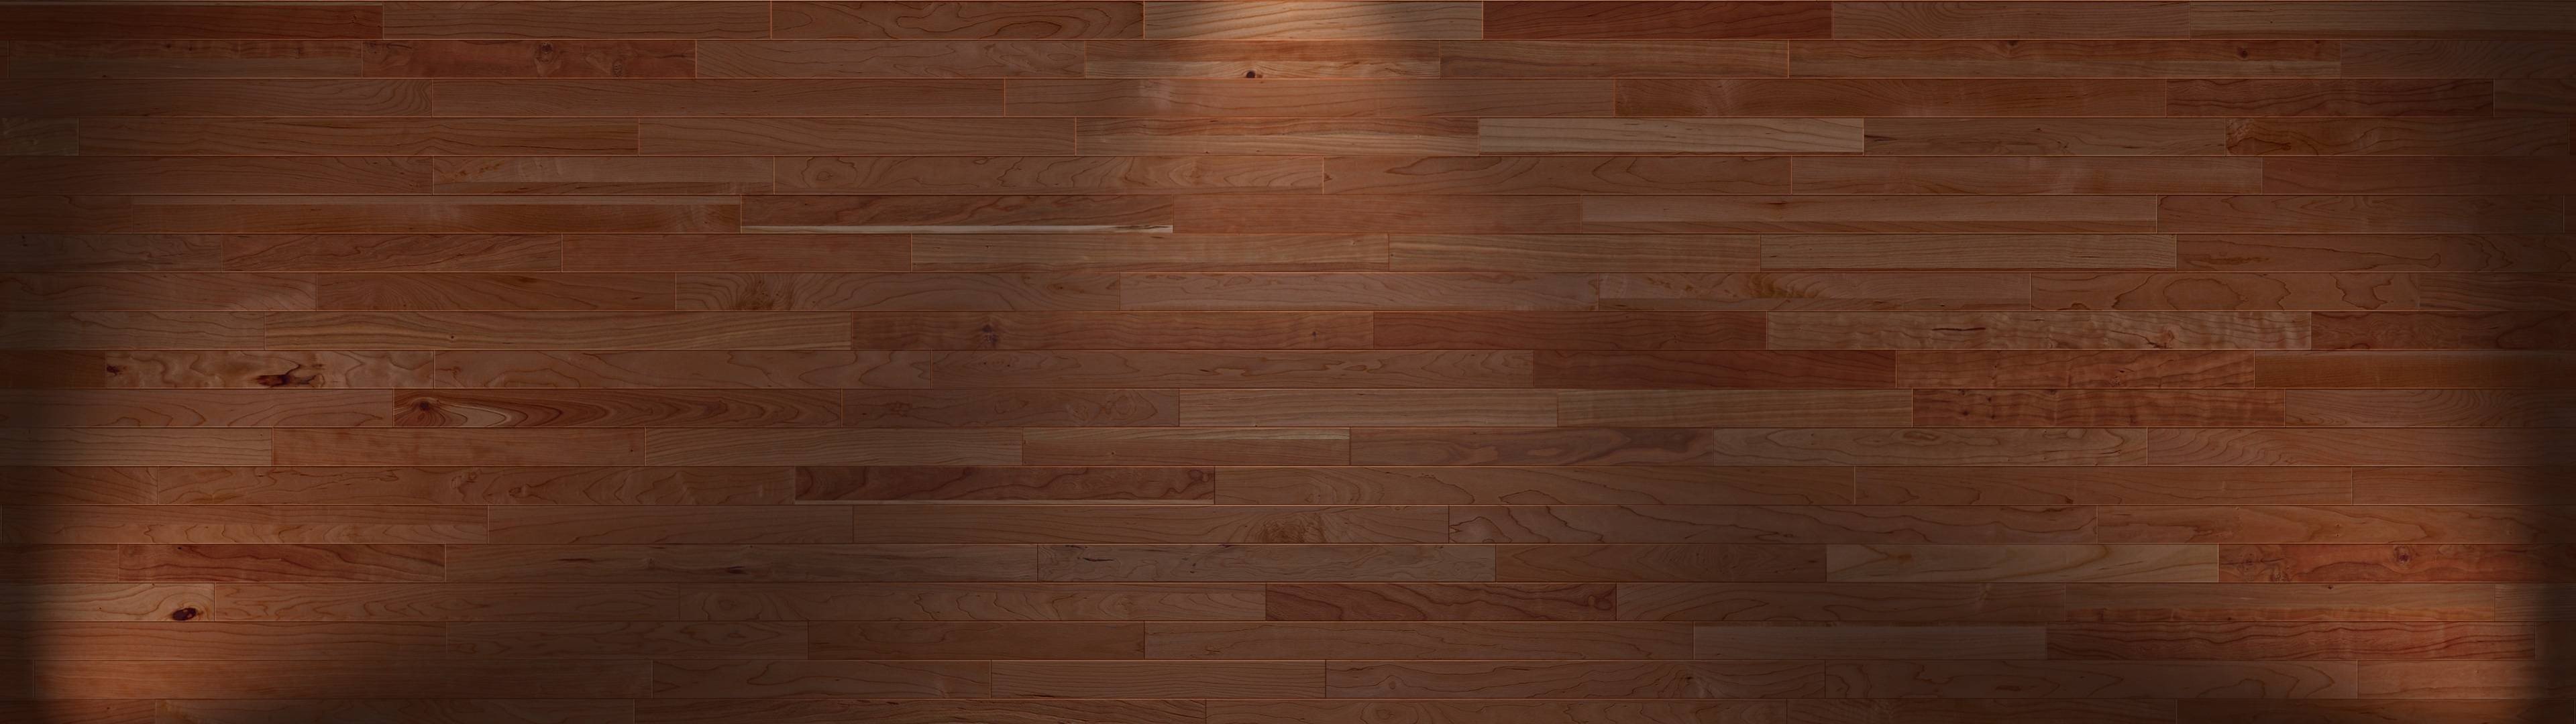 multiple display, Wooden surface Wallpaper